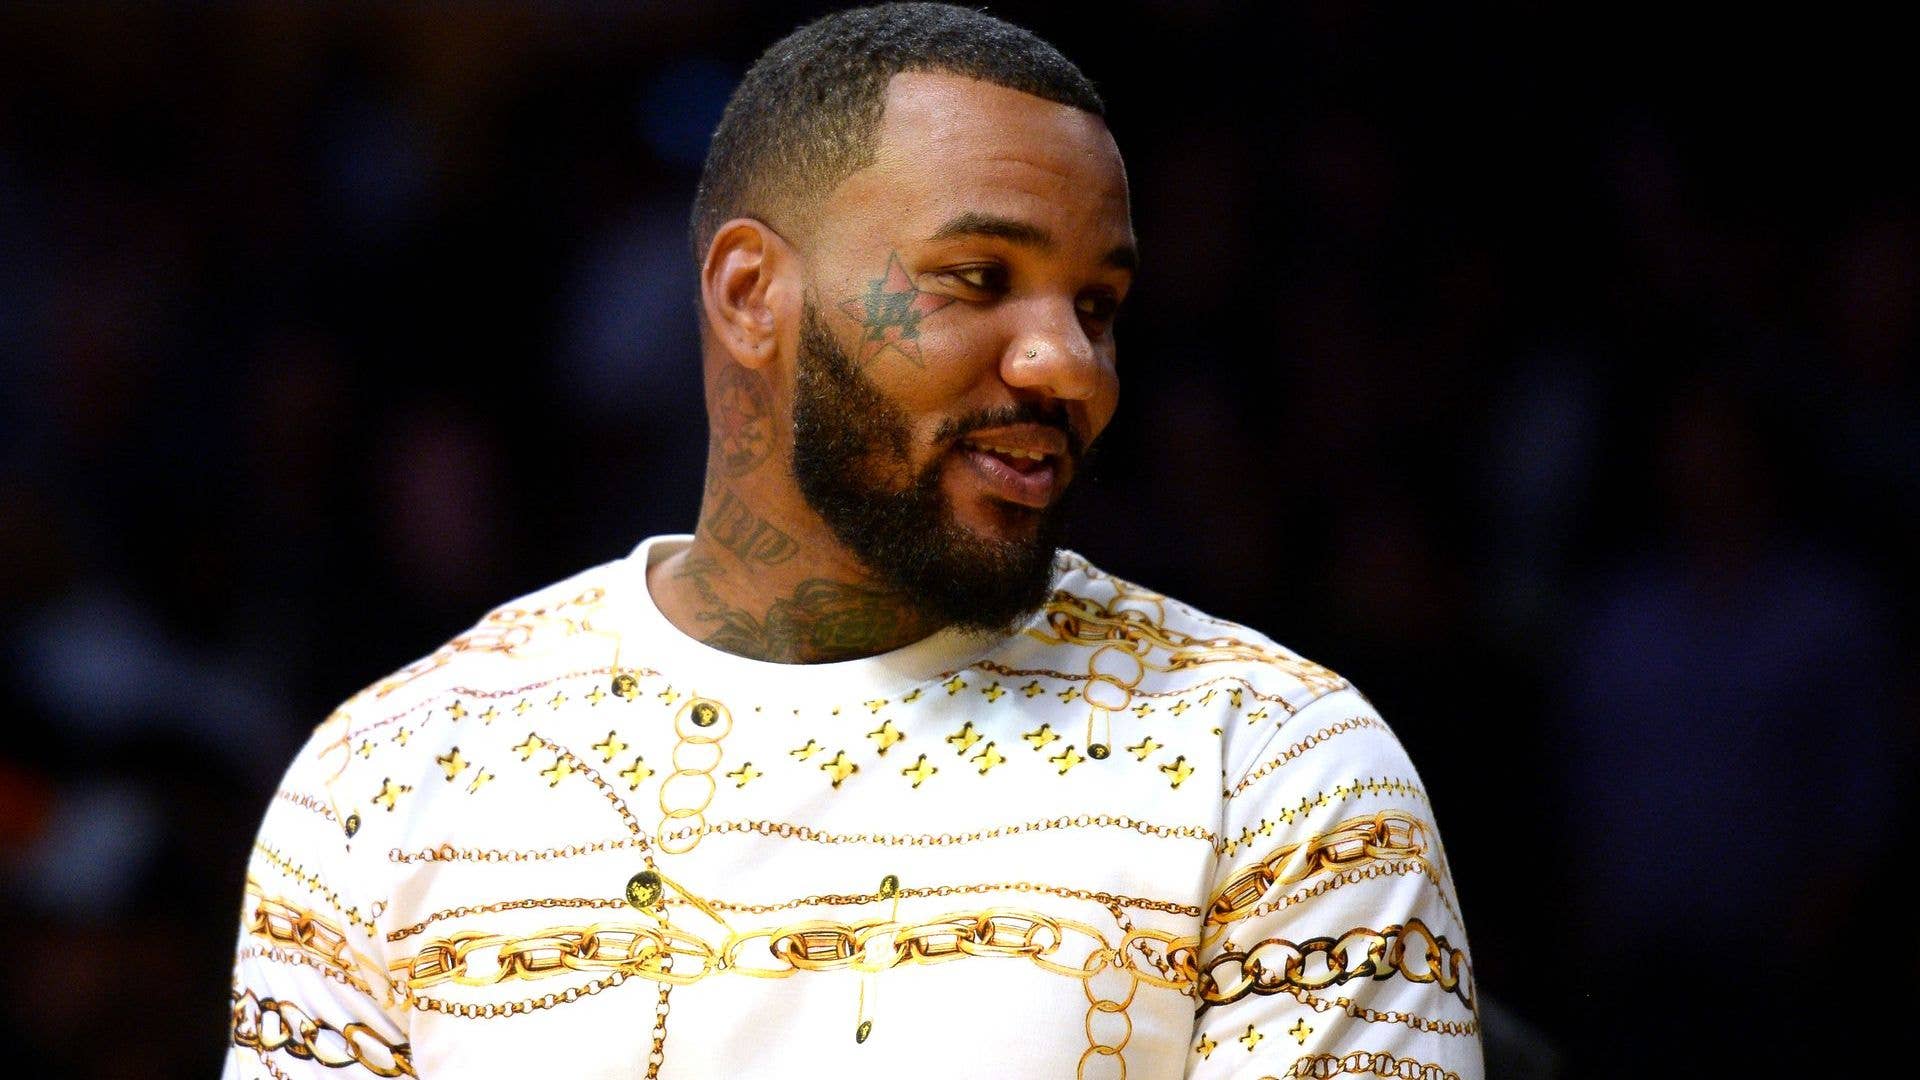 The Game attends Portland Trail Blazers and Los Angeles Lakers pre-season basketball game